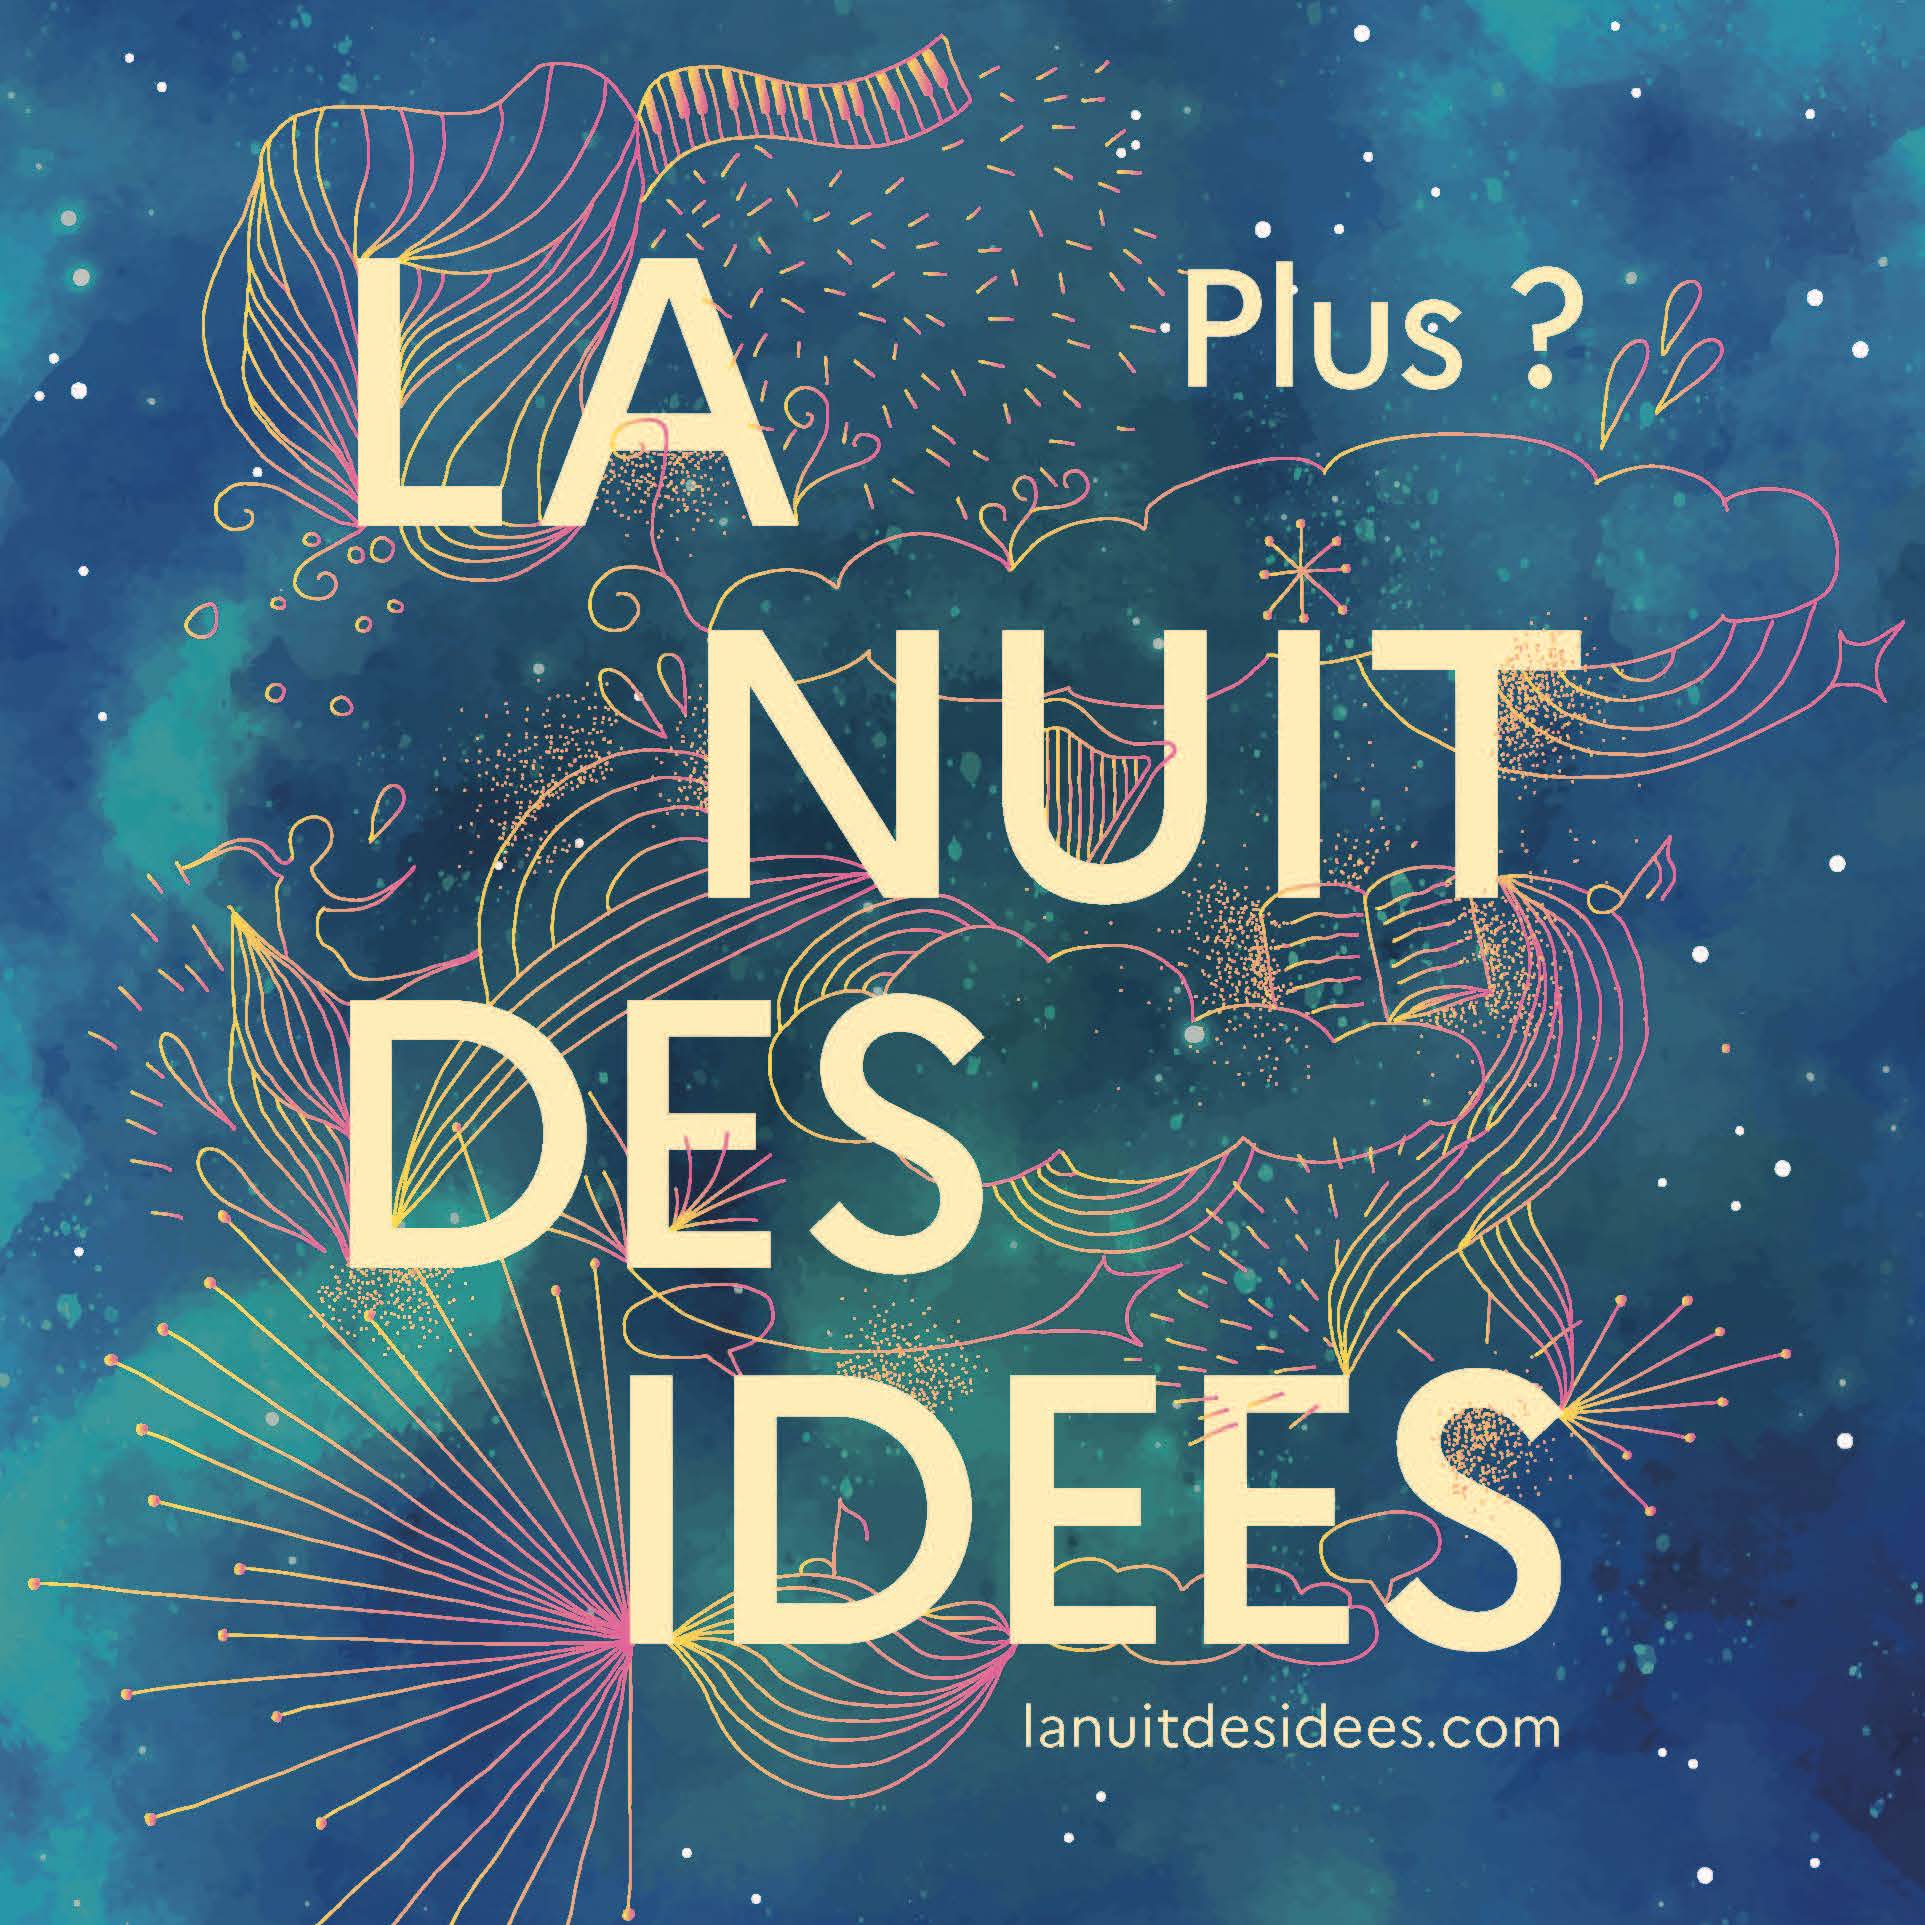 A square graphic that reads “LA NUIT DES IDEES” “Plus?” and “lanuitdesidees.com” in pale yellow, against a dreamy backdrop of a starry night sky, and pink and yellow line drawings of clouds, books, music notes and more.